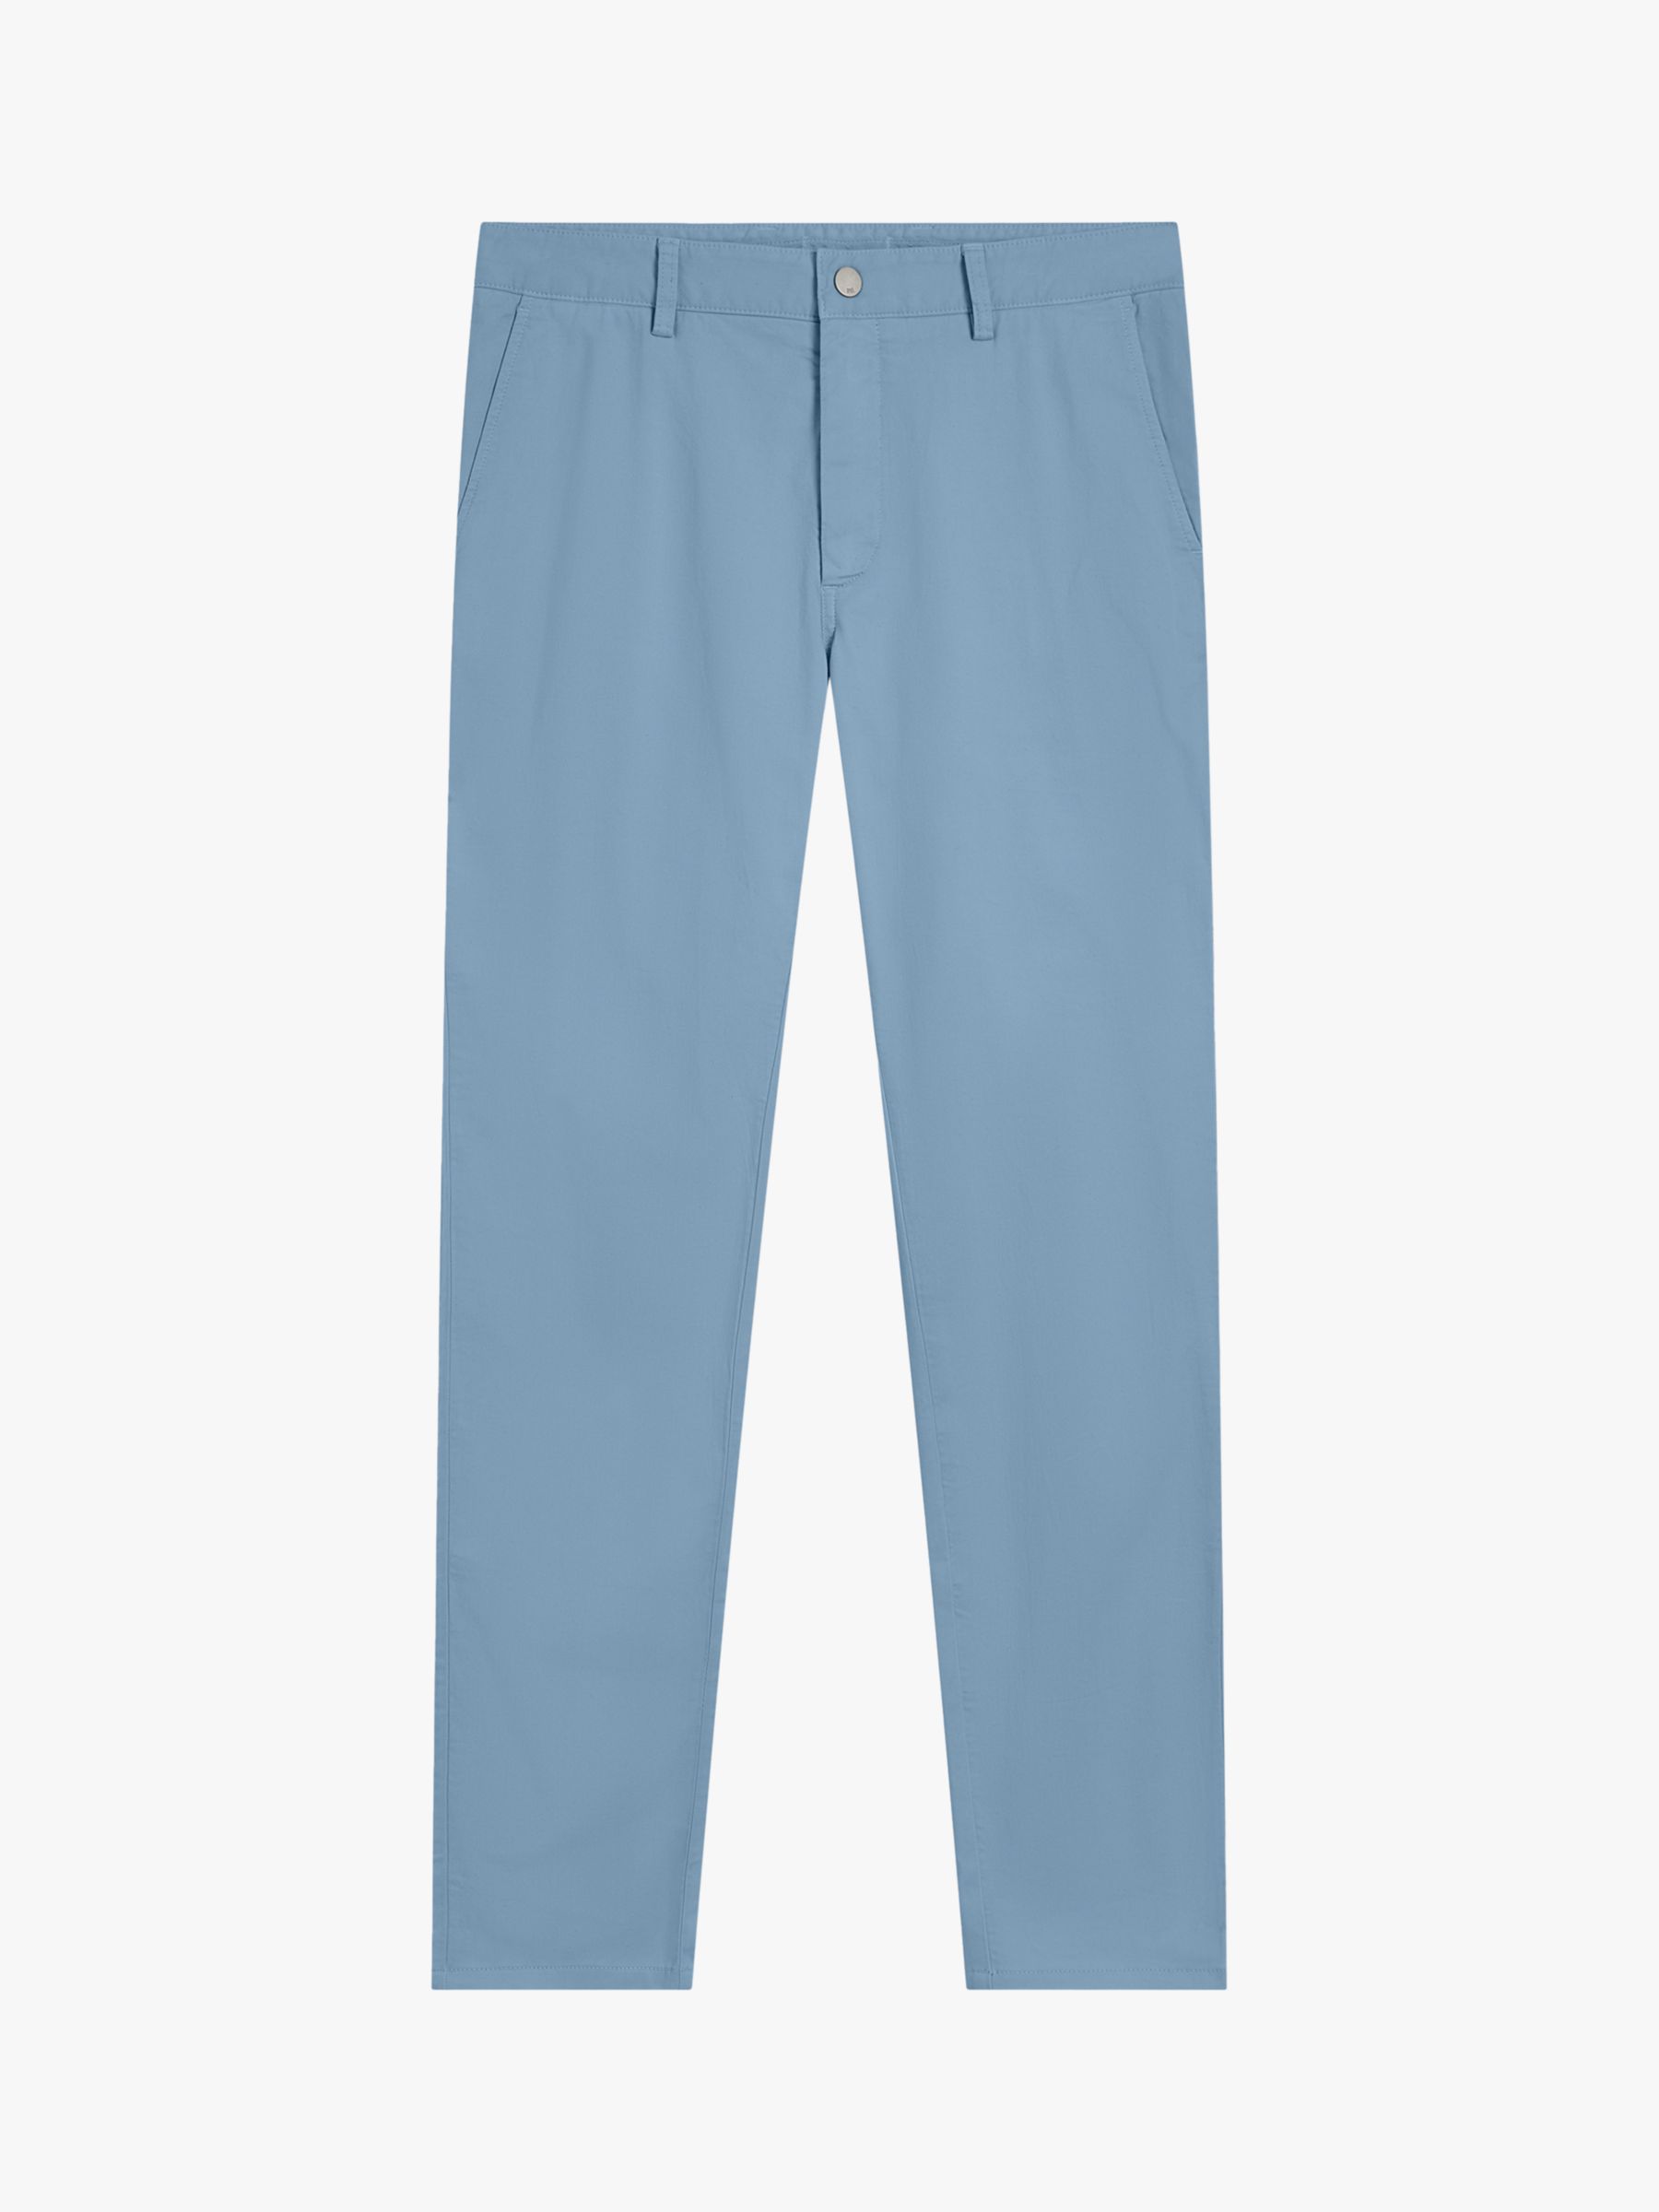 Buy SPOKE Heroes Cotton Blend Broad Thigh Chinos Online at johnlewis.com